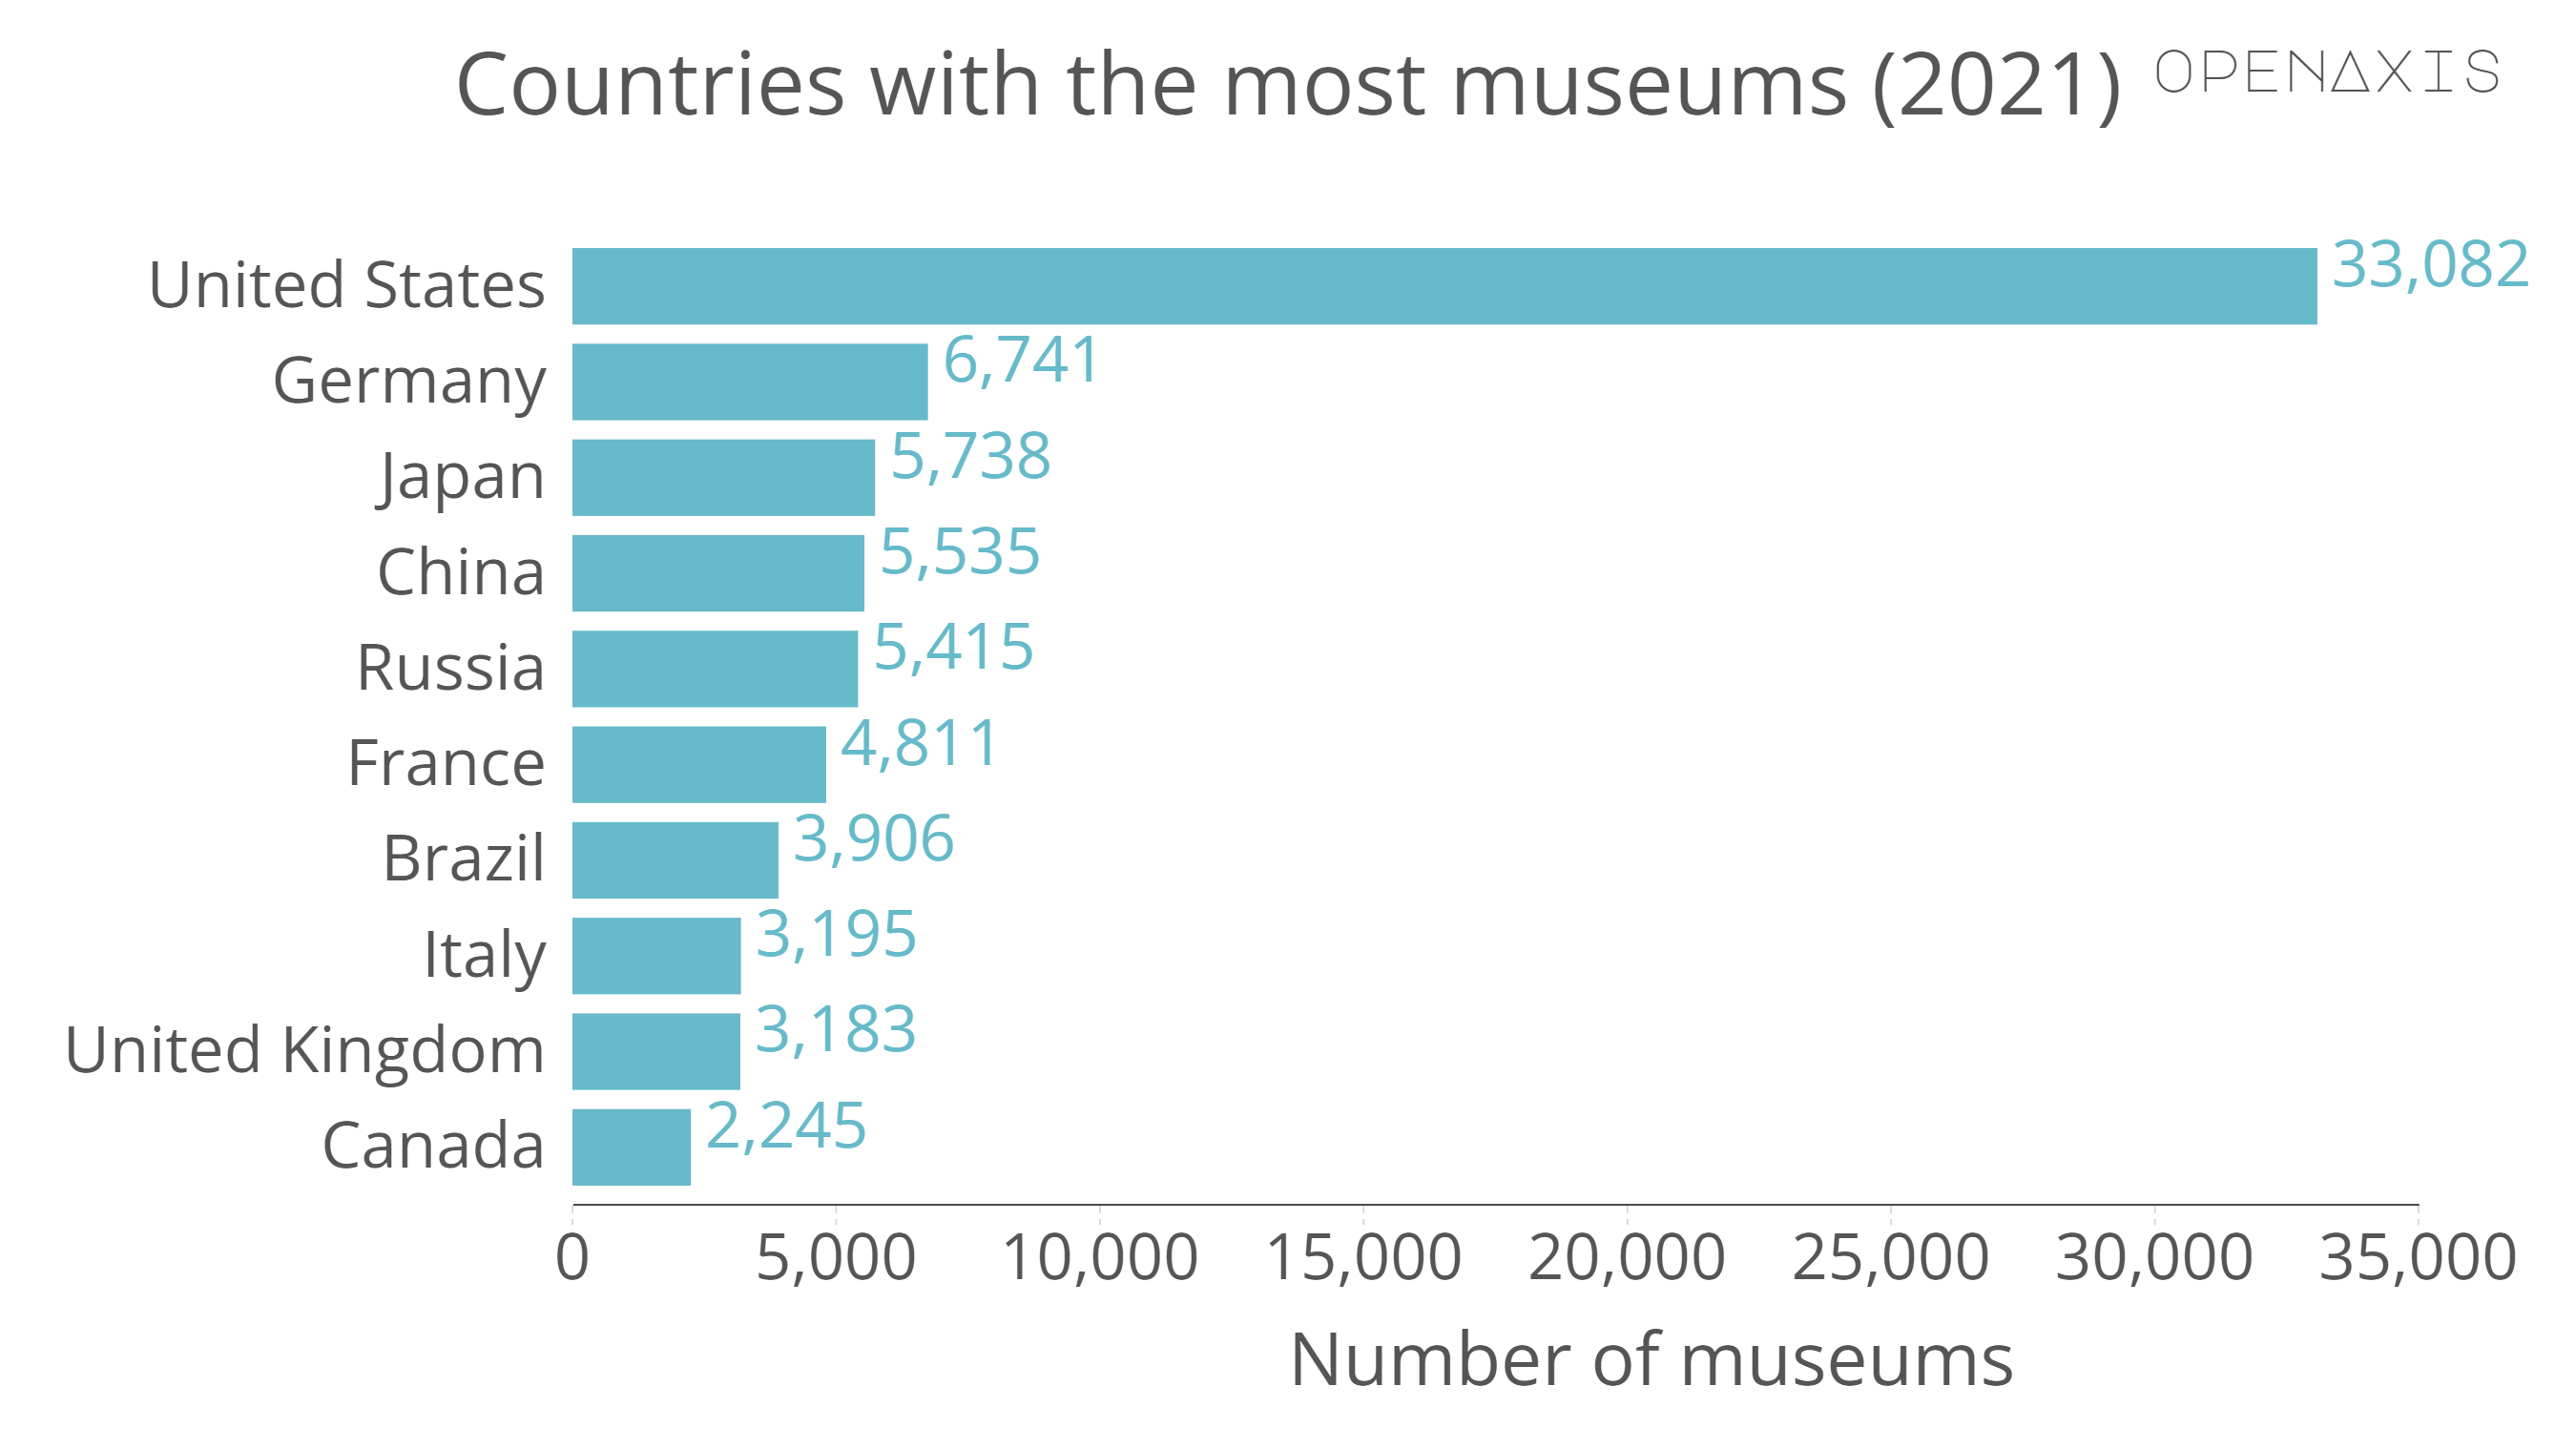 <p>According to UNESCO, the United States recorded the highest number of museums globally, with approximately 33,082 institutions as of March 2021.</p><p><br /></p><p>Germany and Japan followed on the list, with around 6,741 and 5,738 institutions, respectively.</p><p><br /></p><p>Overall, the current estimated total number of museums worldwide is nearly 104,000.</p><p><br /></p><p><span data-index="0" data-denotation-char data-id="0" data-value="&lt;a href=&quot;/search?q=%23culture&quot; target=_self&gt;#culture" data-link="/search?q=%23culture">﻿<span contenteditable="false"><span></span><a href="/search?q=%23culture" target="_self">#culture</a></span>﻿</span> <span data-index="0" data-denotation-char data-id="0" data-value="&lt;a href=&quot;/search?q=%23arts&quot; target=_self&gt;#arts" data-link="/search?q=%23arts">﻿<span contenteditable="false"><span></span><a href="/search?q=%23arts" target="_self">#arts</a></span>﻿</span></p><p><br /></p><p>Source: <a href="/data/3980" target="_blank">UNESCO</a></p><p><br /></p>